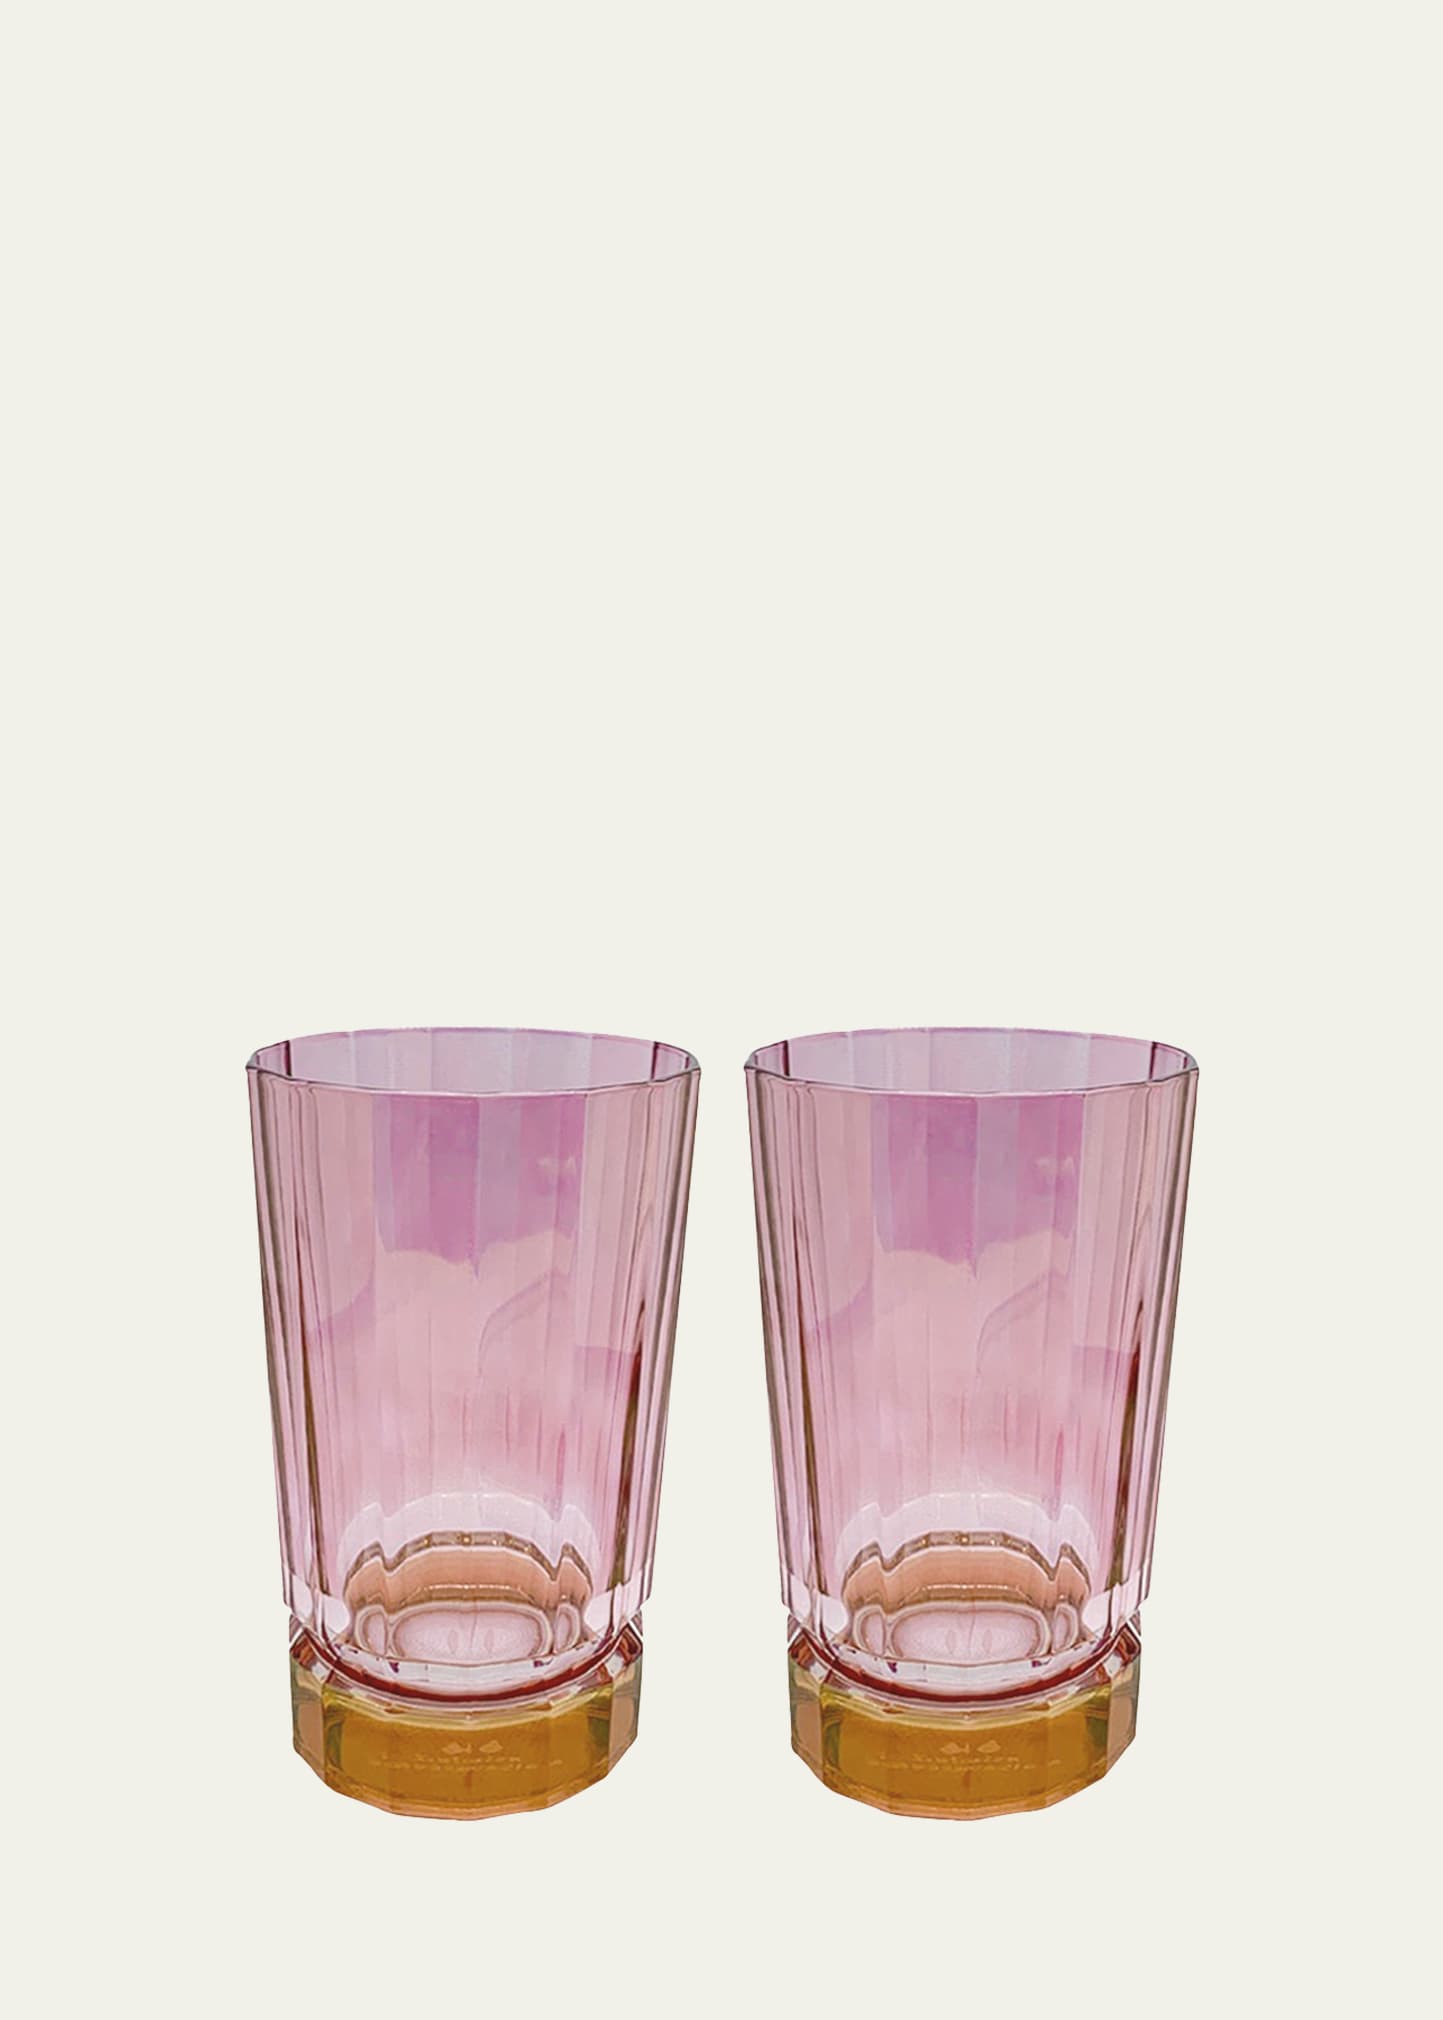 Luisa Beccaria Pink Shaded Glass Tumblers, Set of 2